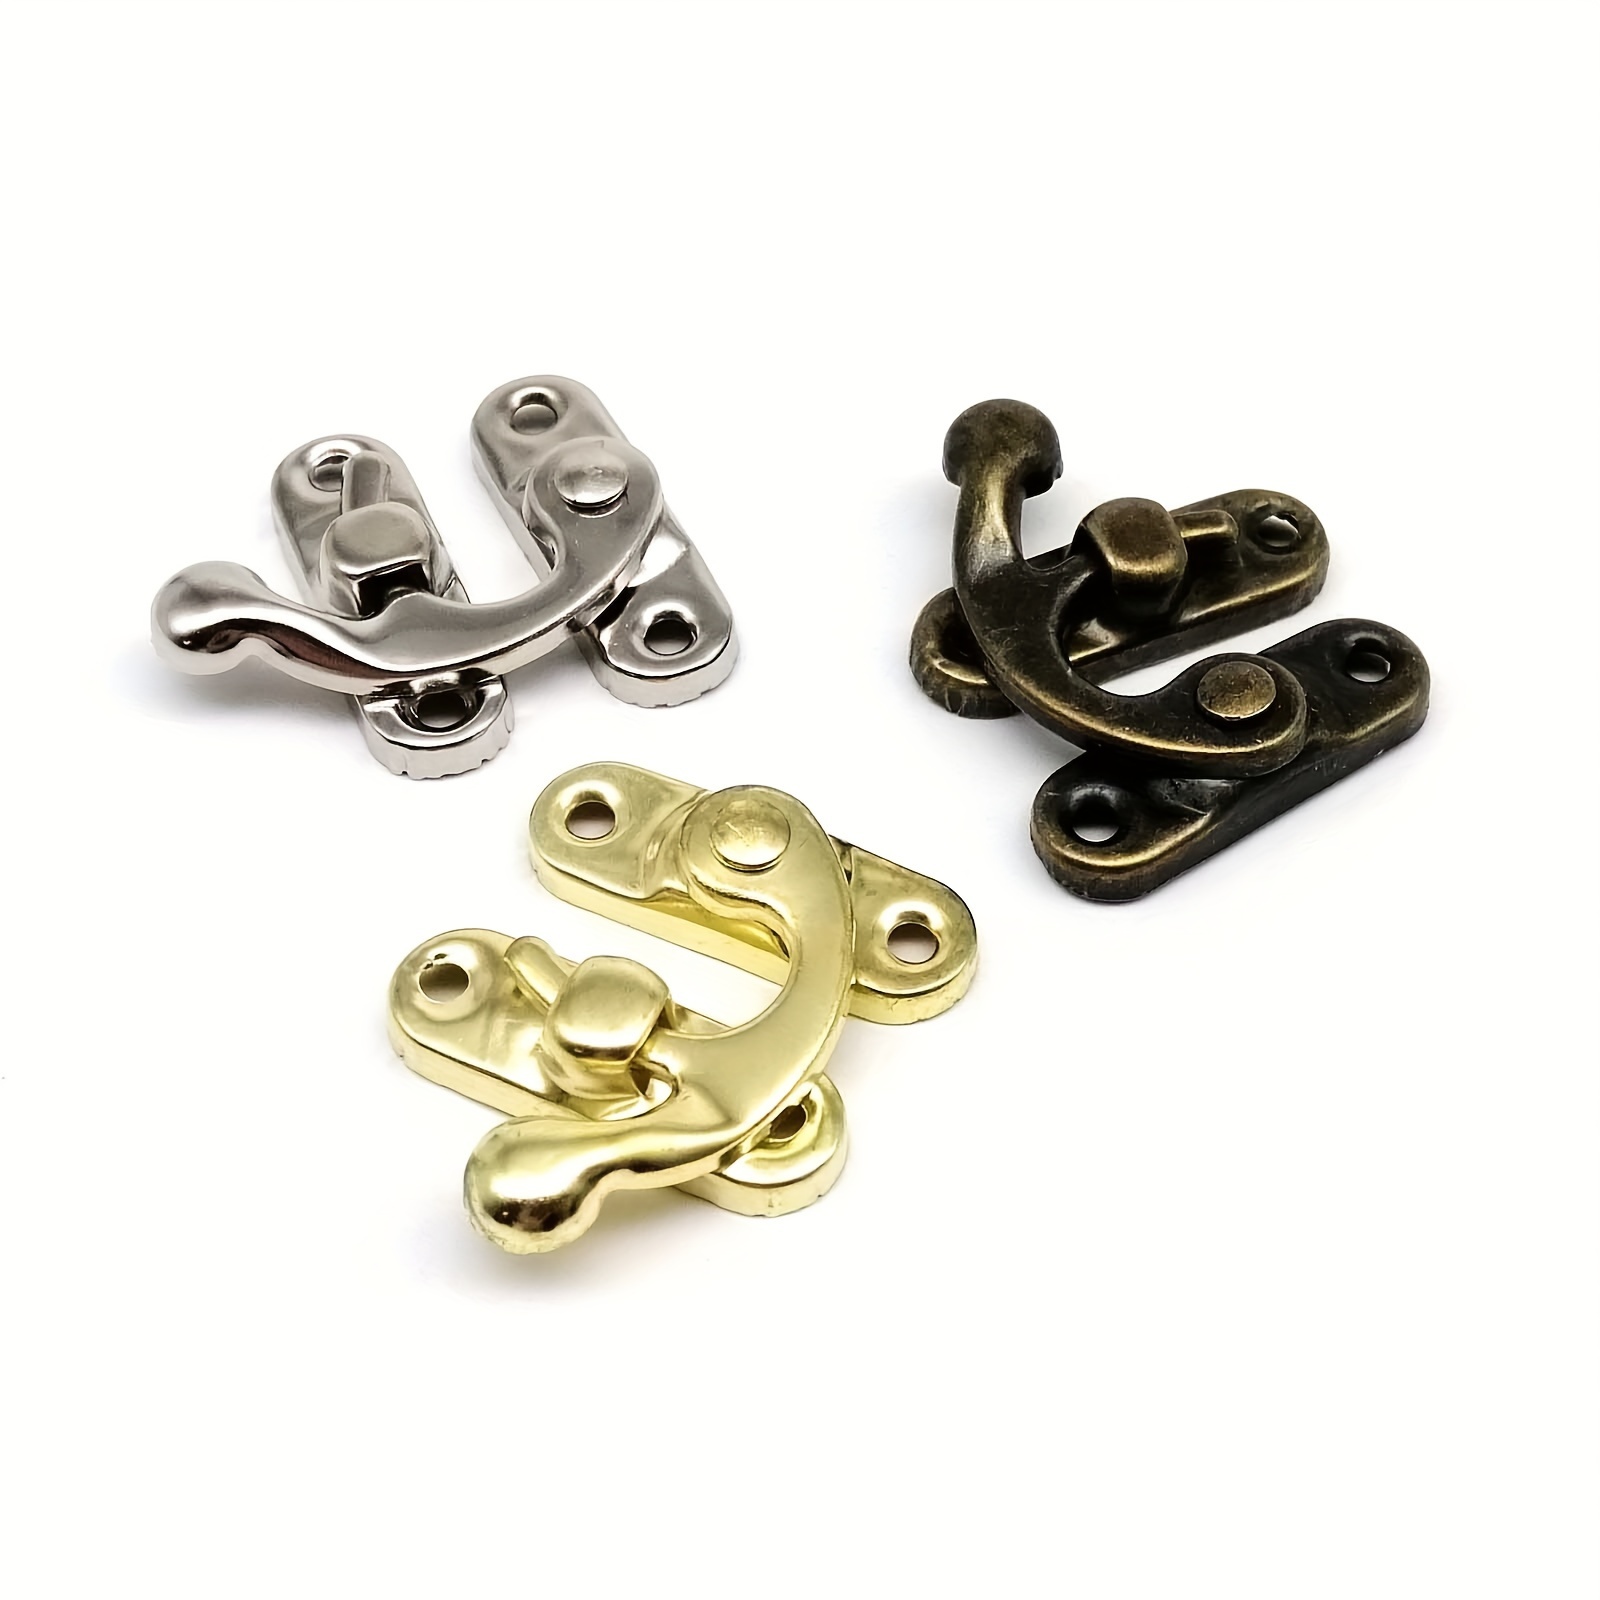 Small Wall Hanger Antique Hooks Buckle Horn Lock Clasp Hook Hasp Latch For  Wooden Jewelry Box Furniture JllQRb From Mx_home, $1.35